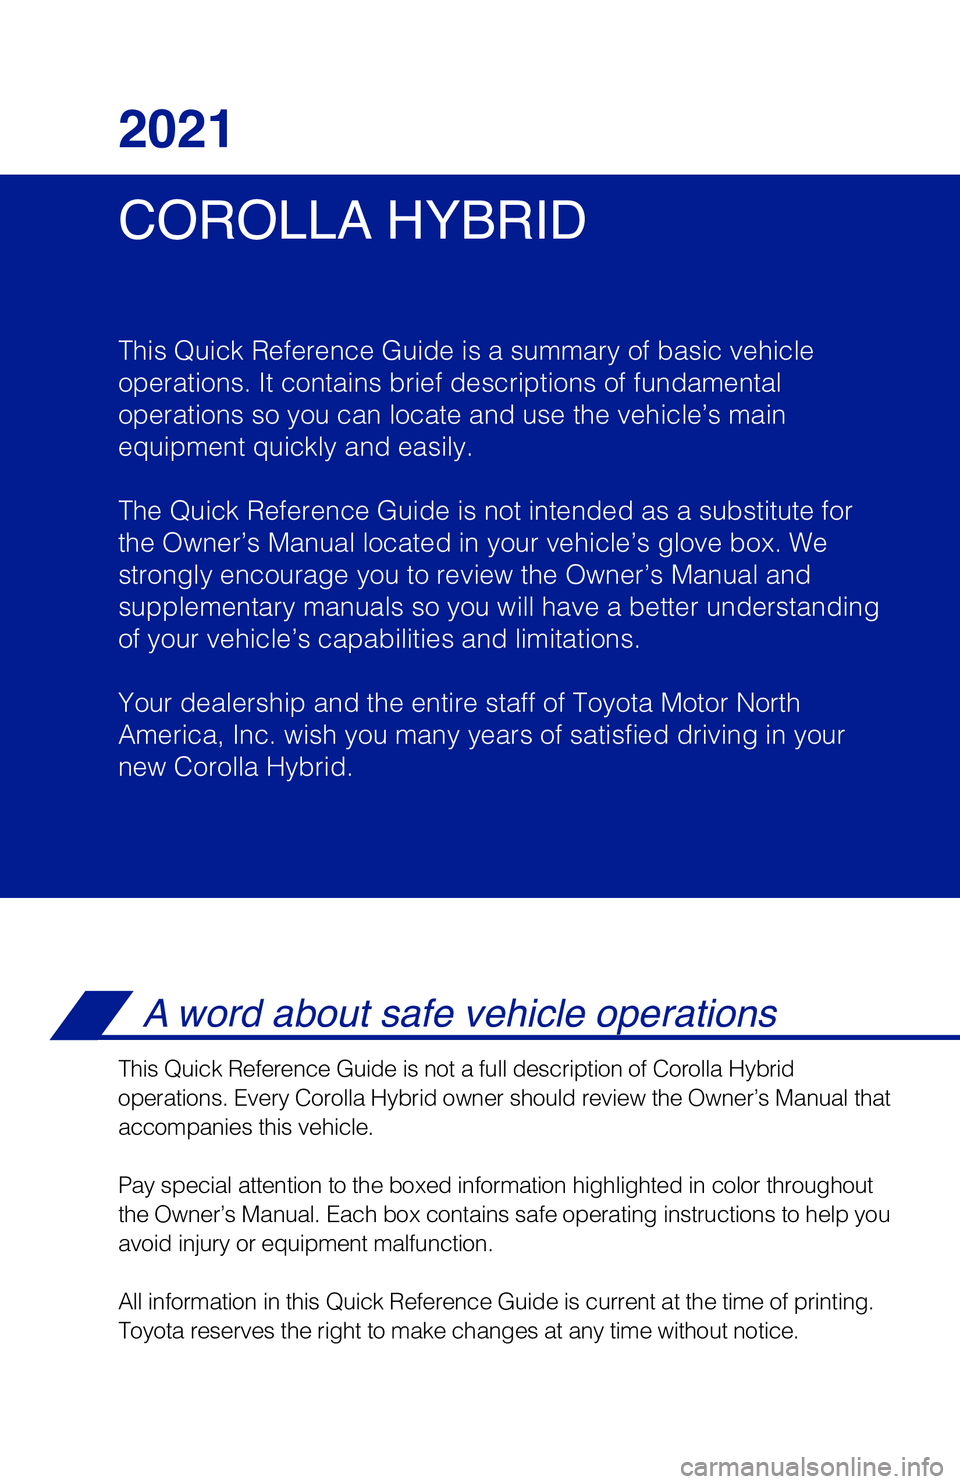 TOYOTA COROLLA HYBRID 2021  Owners Manual (in English) 1 Visit your Toyota dealer for information on customizing this feature.2 Programmable by customer. Refer to the Owner’s Manual for instructio\
ns and more information.3 HomeLink® is a registered tr